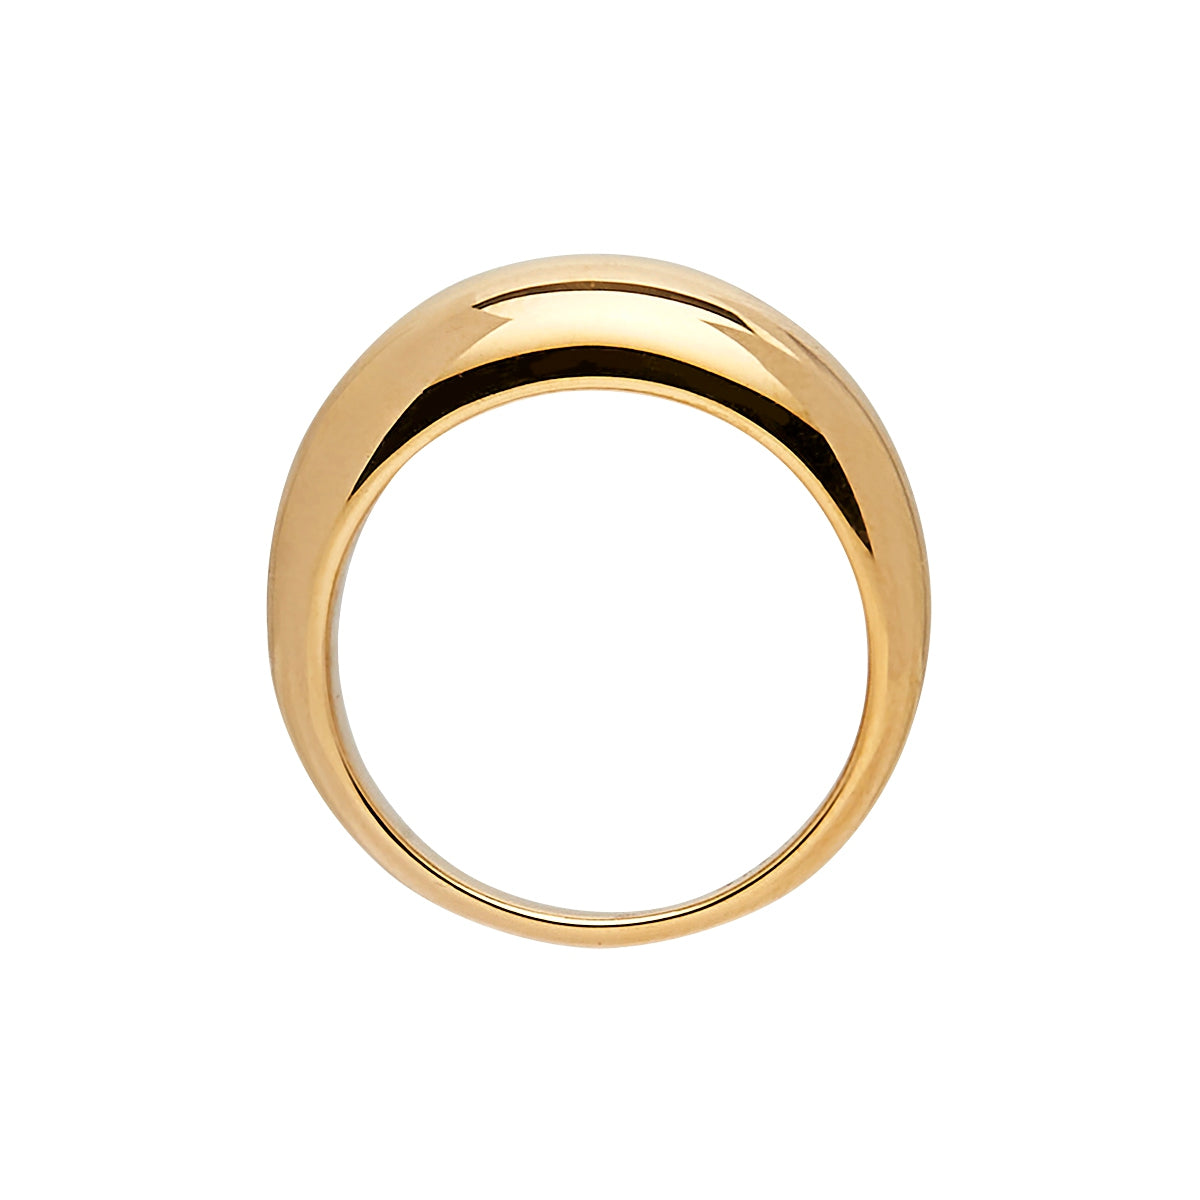 Najo Sublime Yellow Gold Ring SizeT1/2